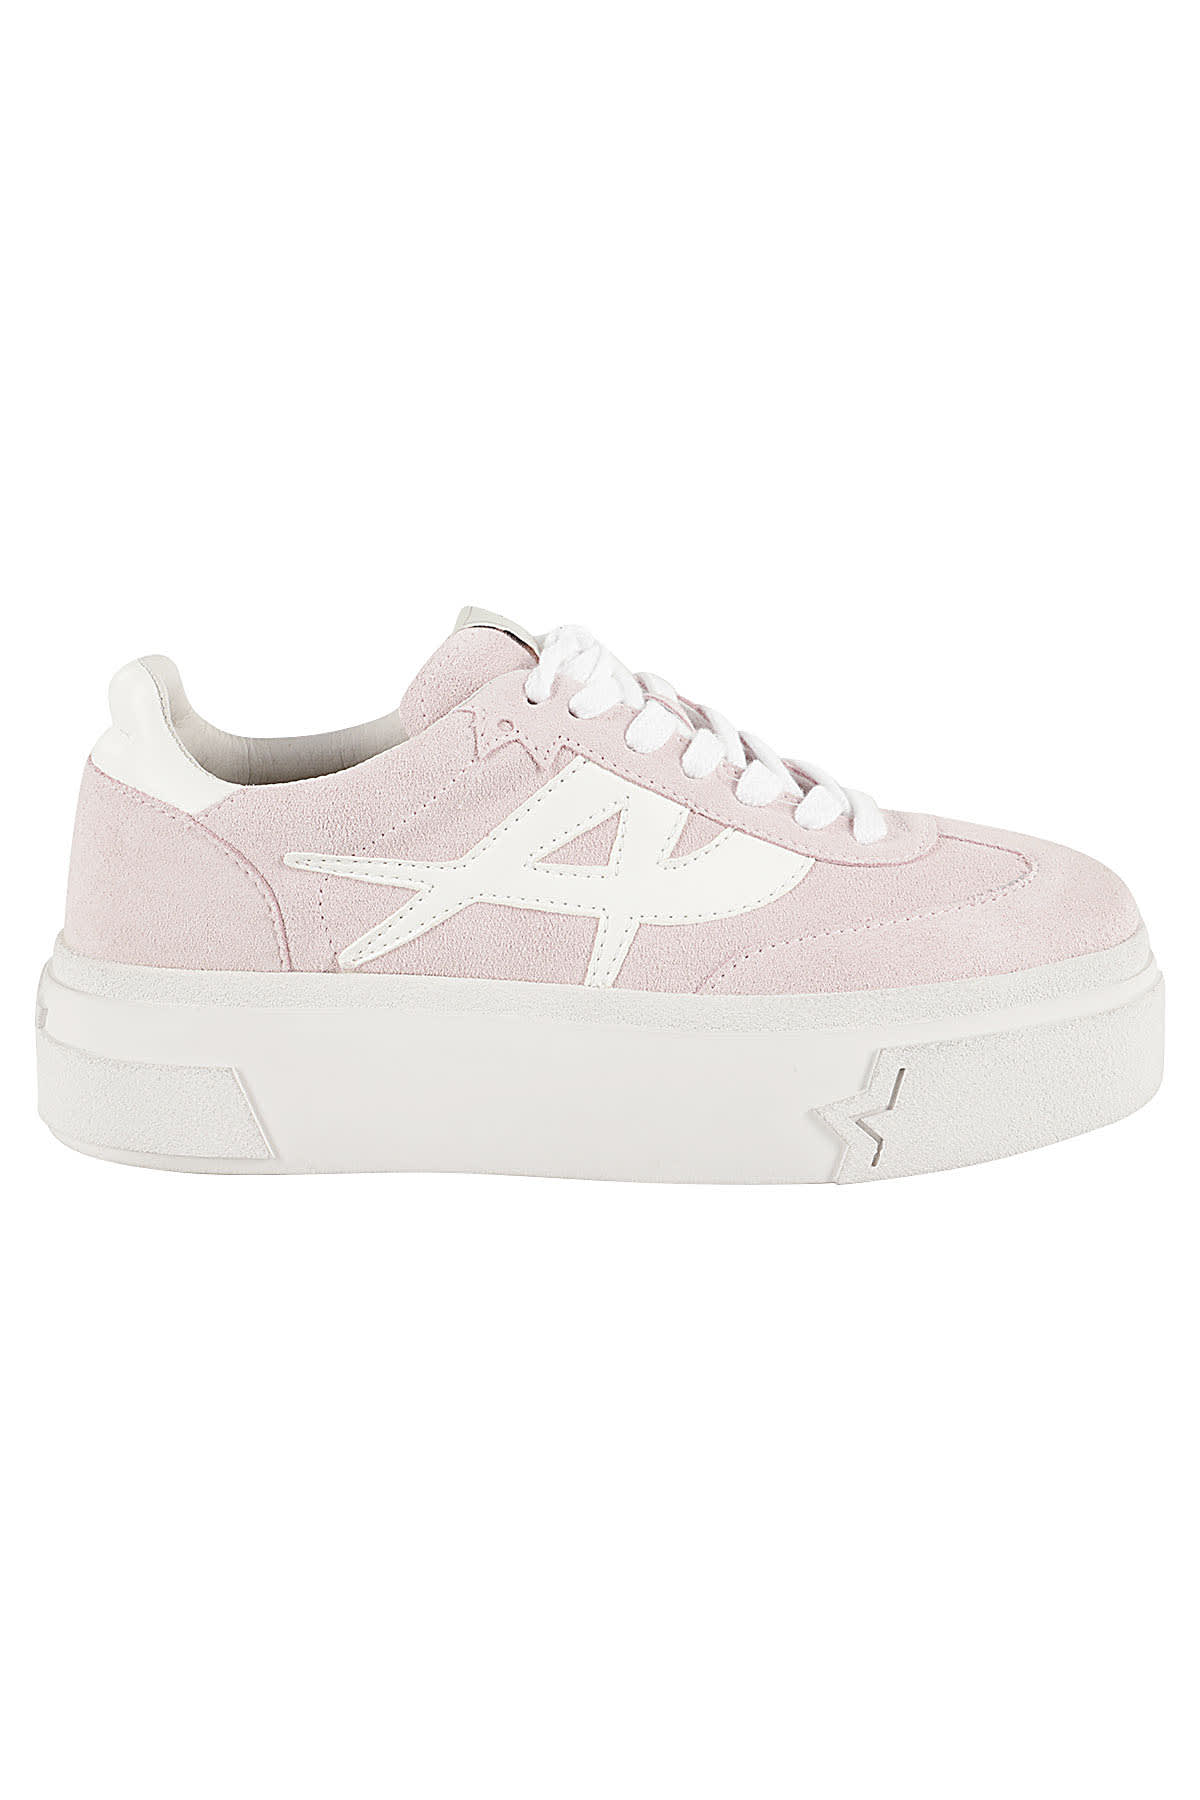 Shop Ash Calf Suede Crystal In Rose Wht